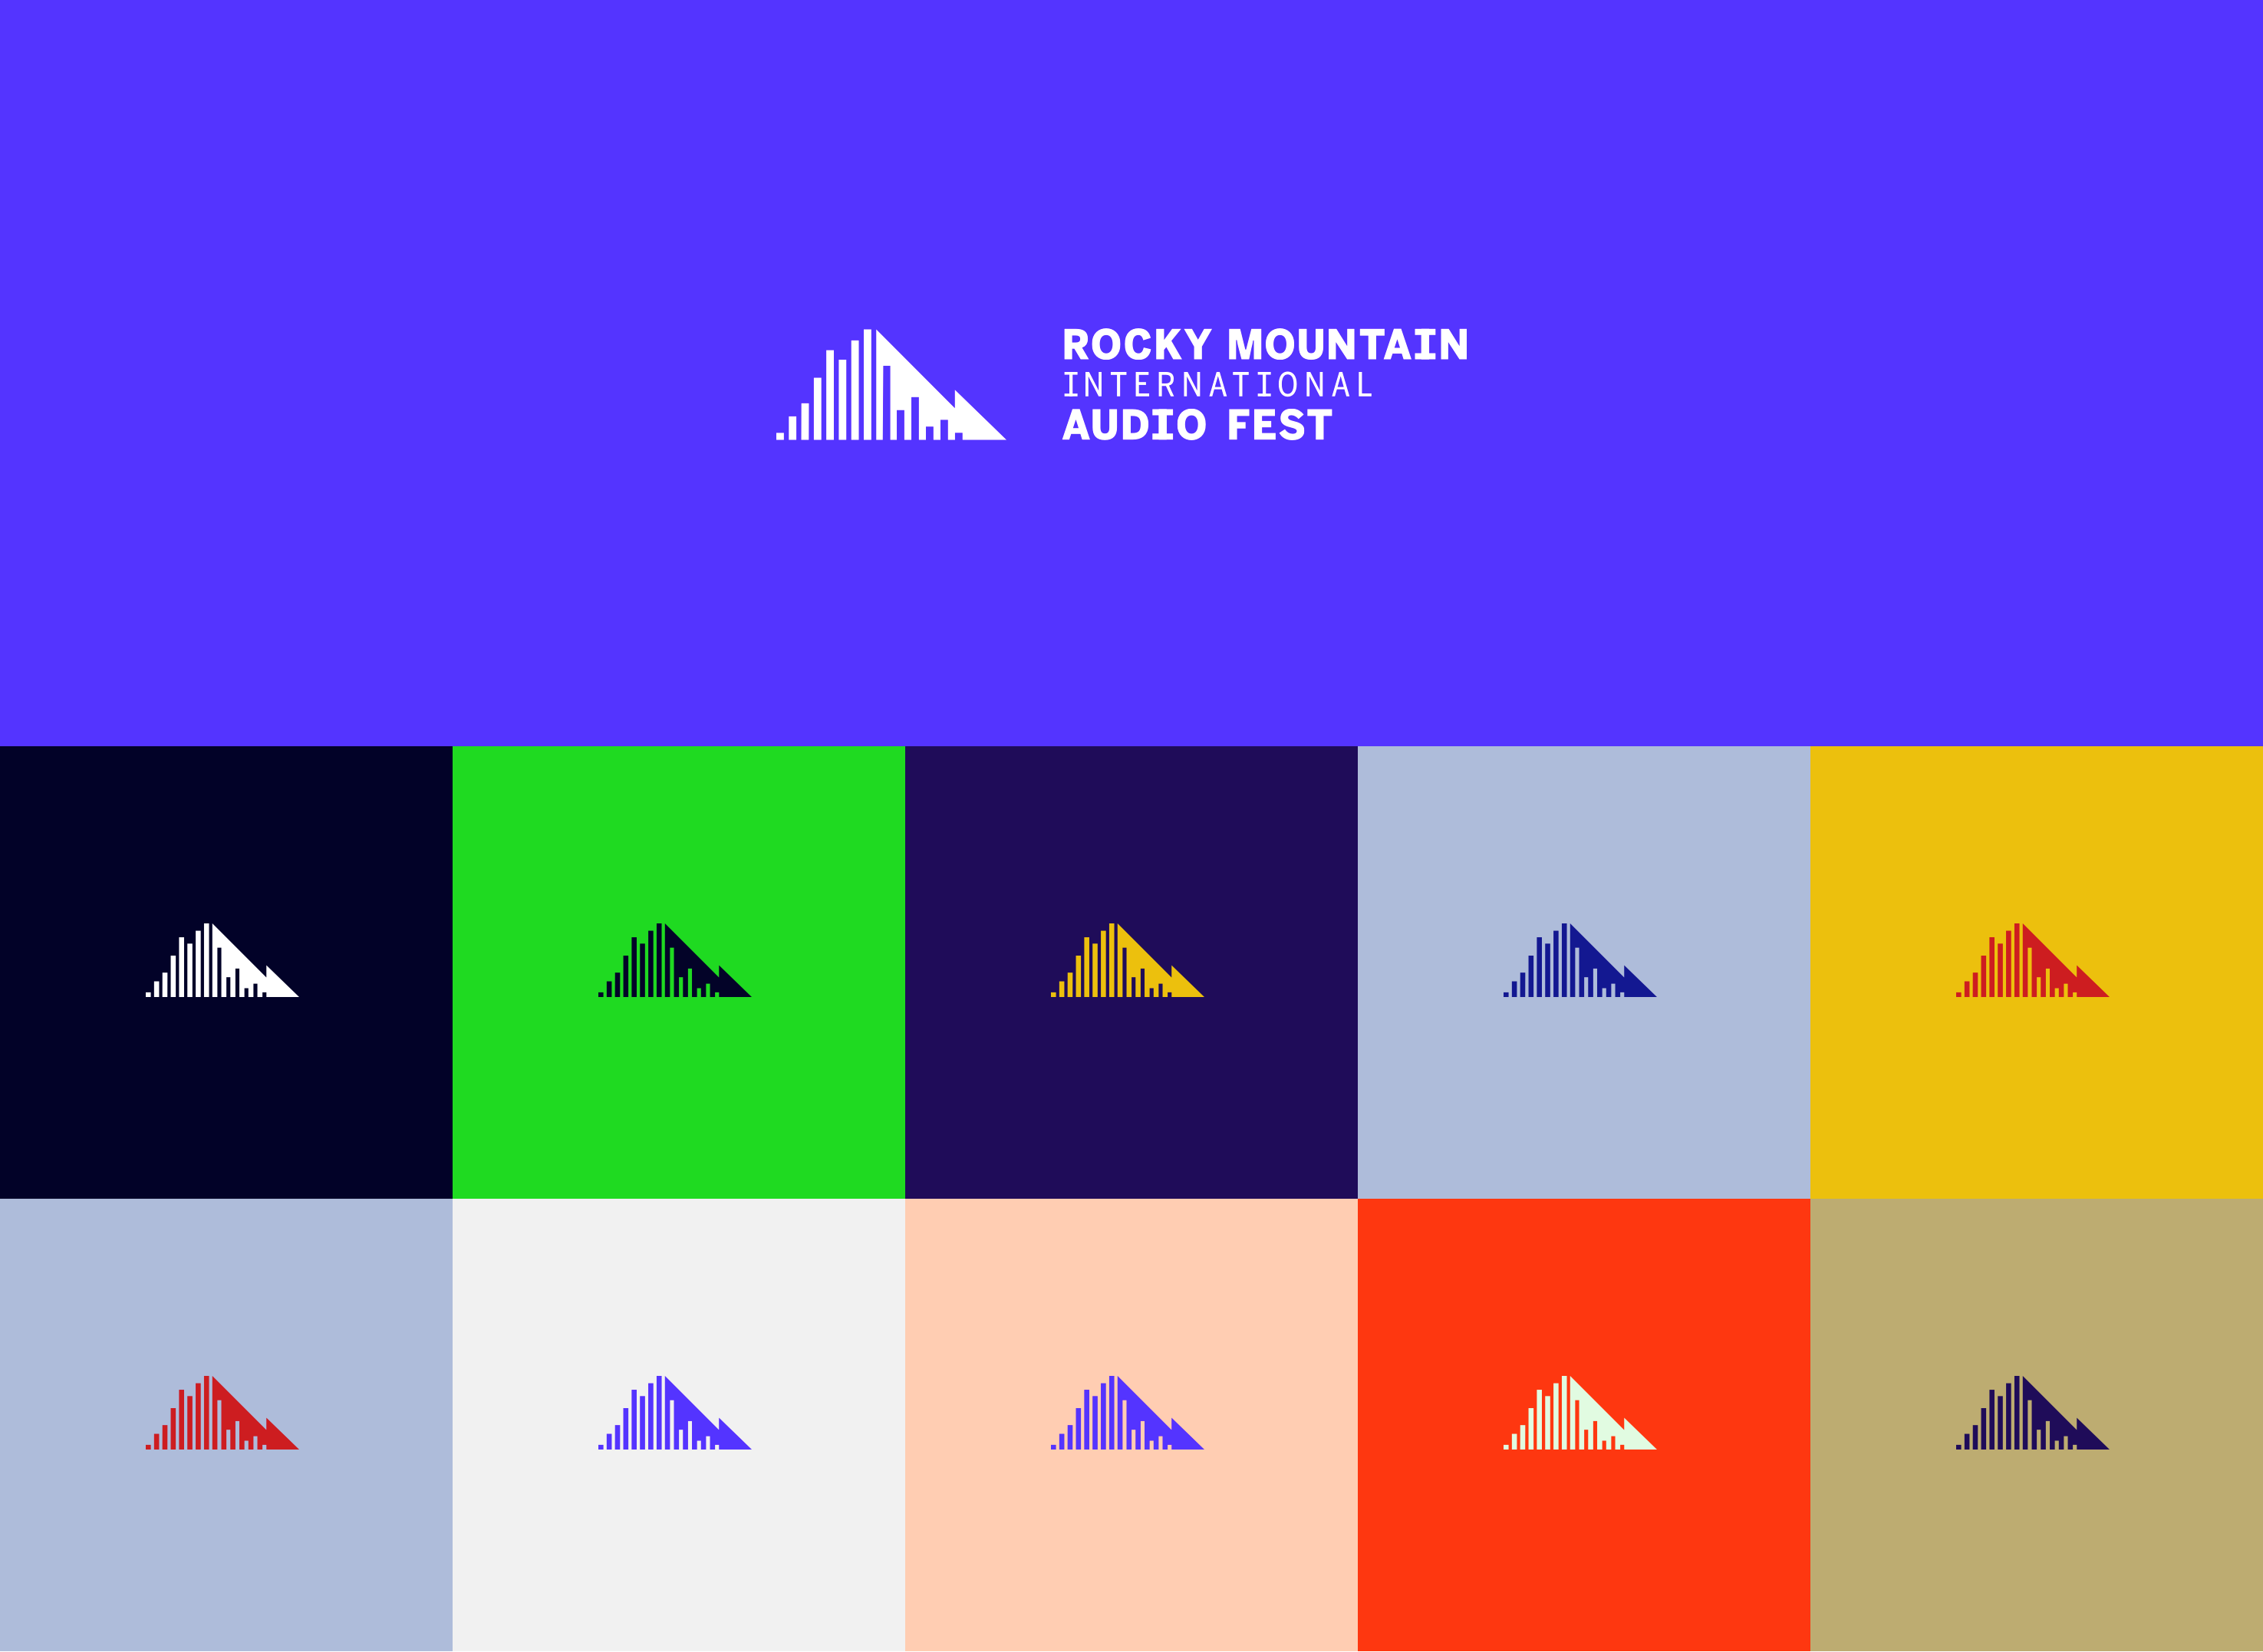 "Rocky Mountain International Audio Fest" and the icon on a blueblackgorund in the top half of image. The bottom half is split up into ten blocks, each block is a different colour and houses the festival's icon in a contrasting colour